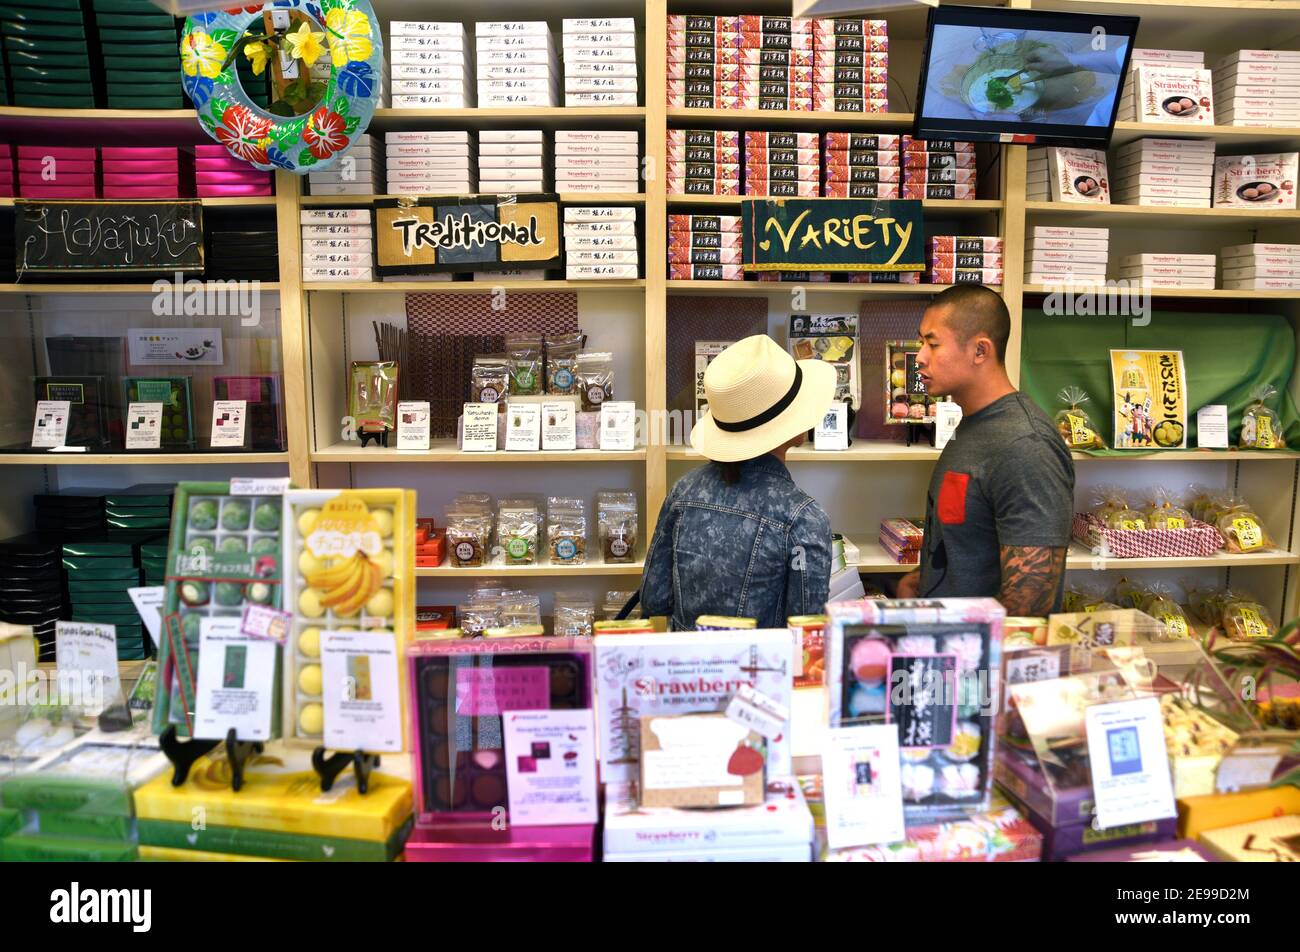 https://c8.alamy.com/comp/2E99D2M/a-couple-peruse-the-selection-of-japanese-food-items-for-sale-in-a-shop-in-the-japantown-area-of-san-francisco-california-2E99D2M.jpg